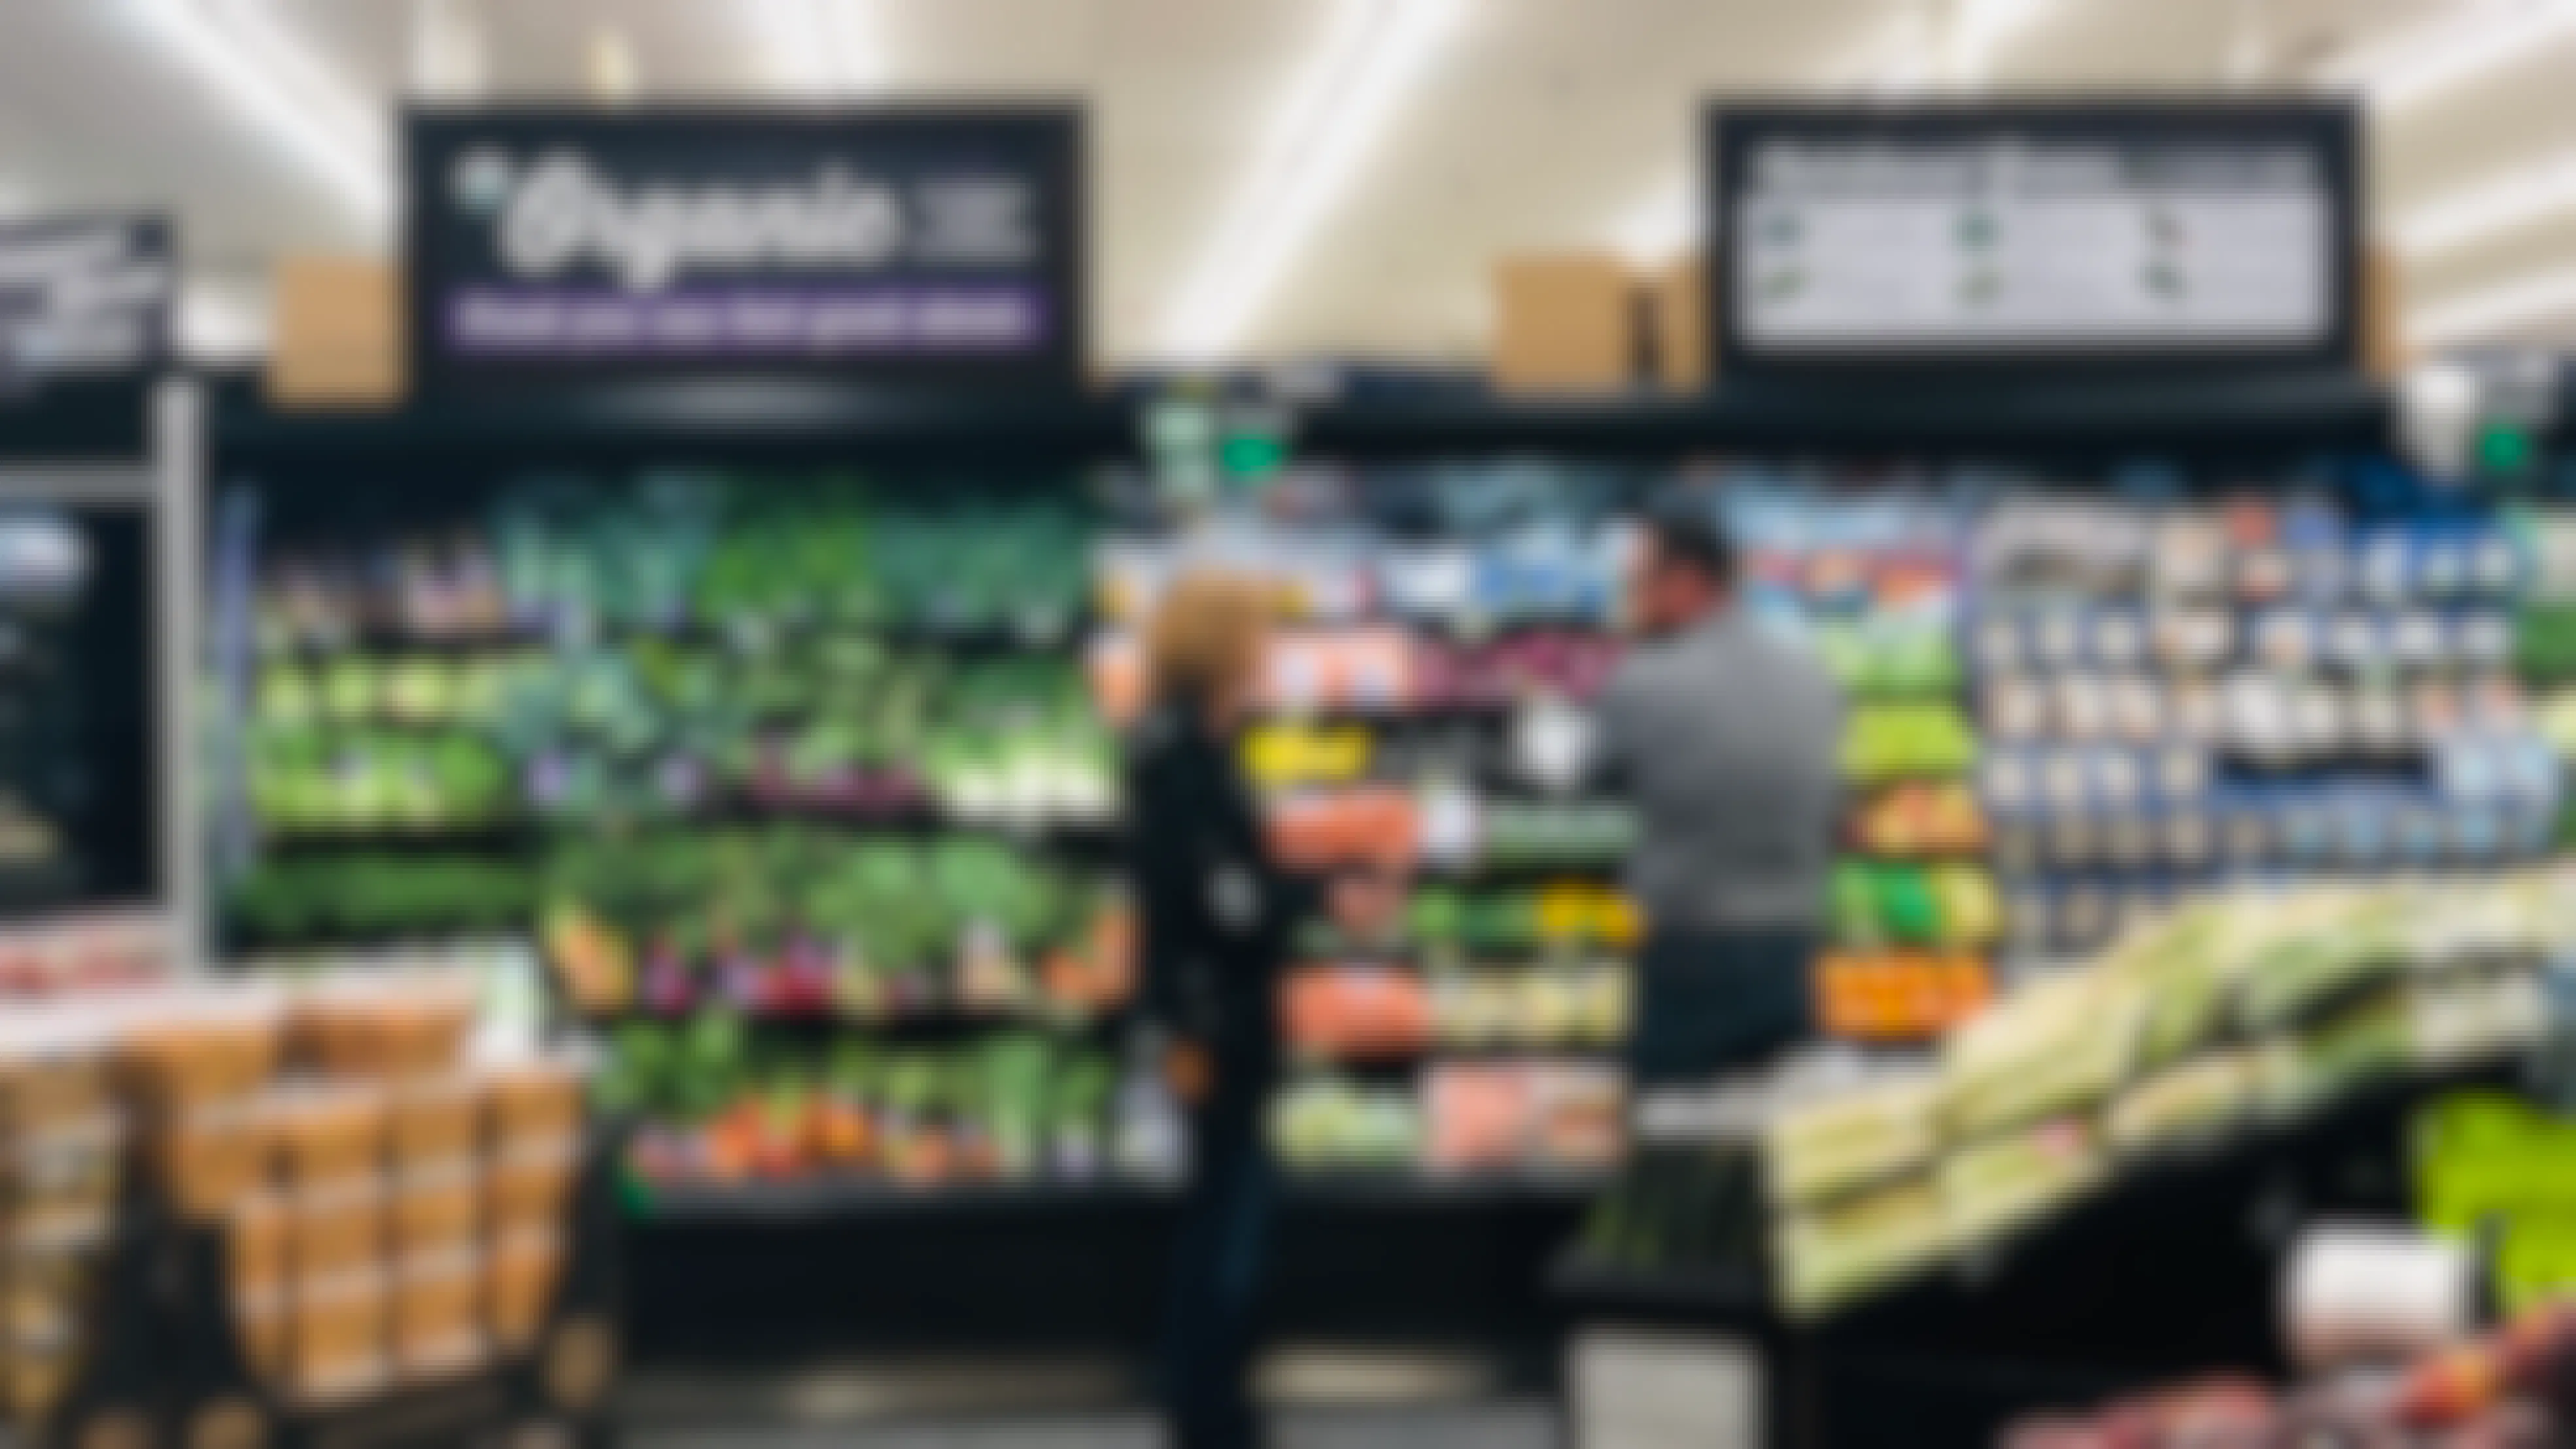 The Top Grocery Stores of 2020: Is Yours on the List?